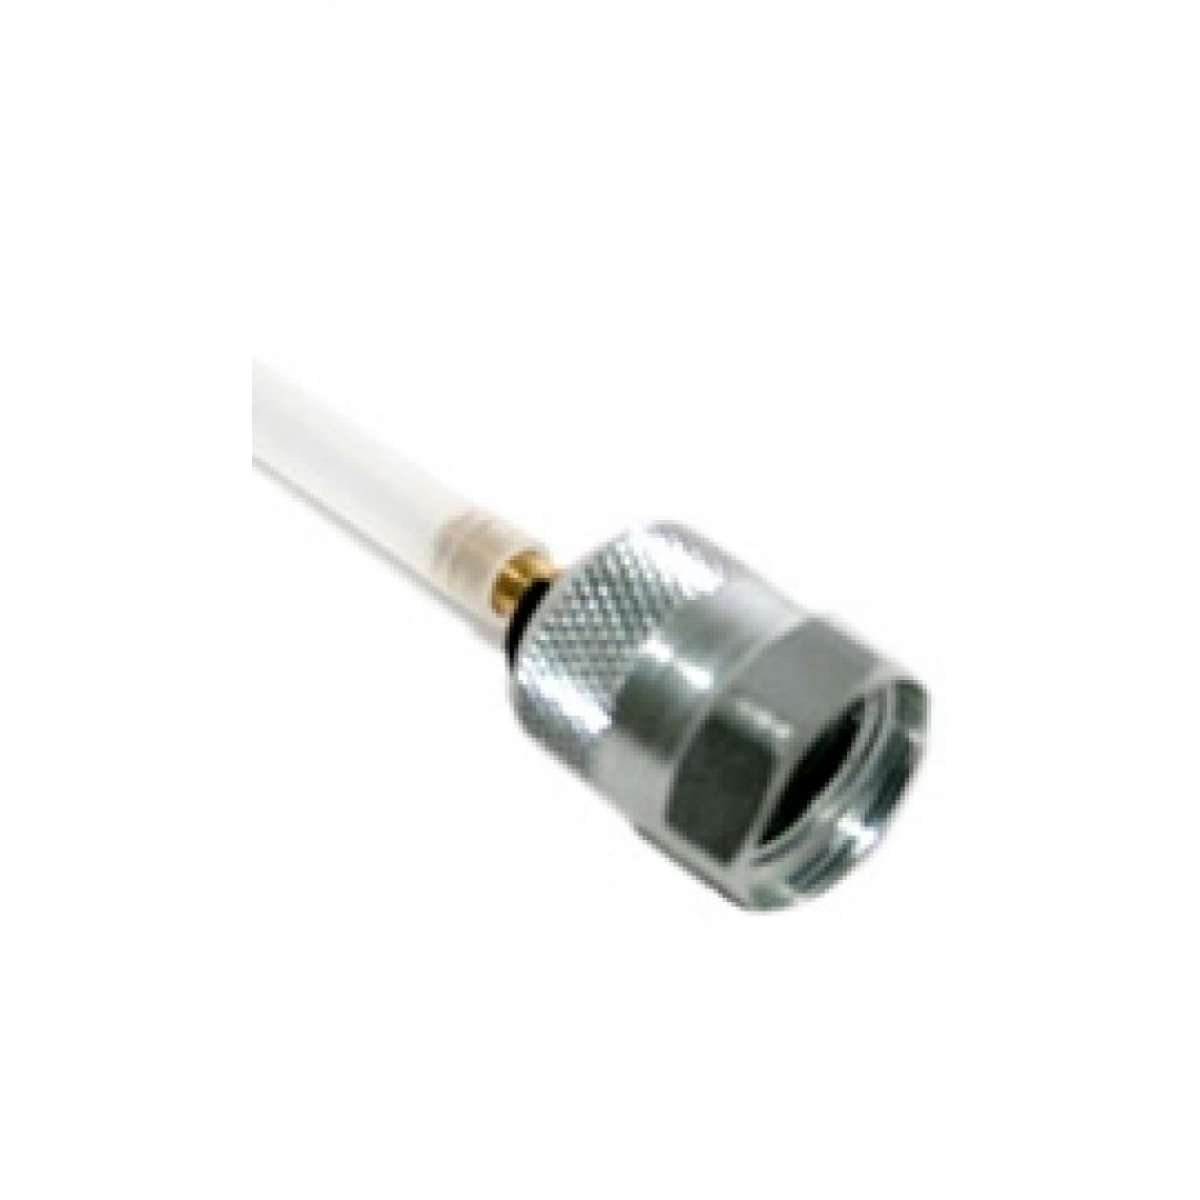 M Series M16x2 Probe Adapter with Barb for 1/4" OD Disposable Tubing